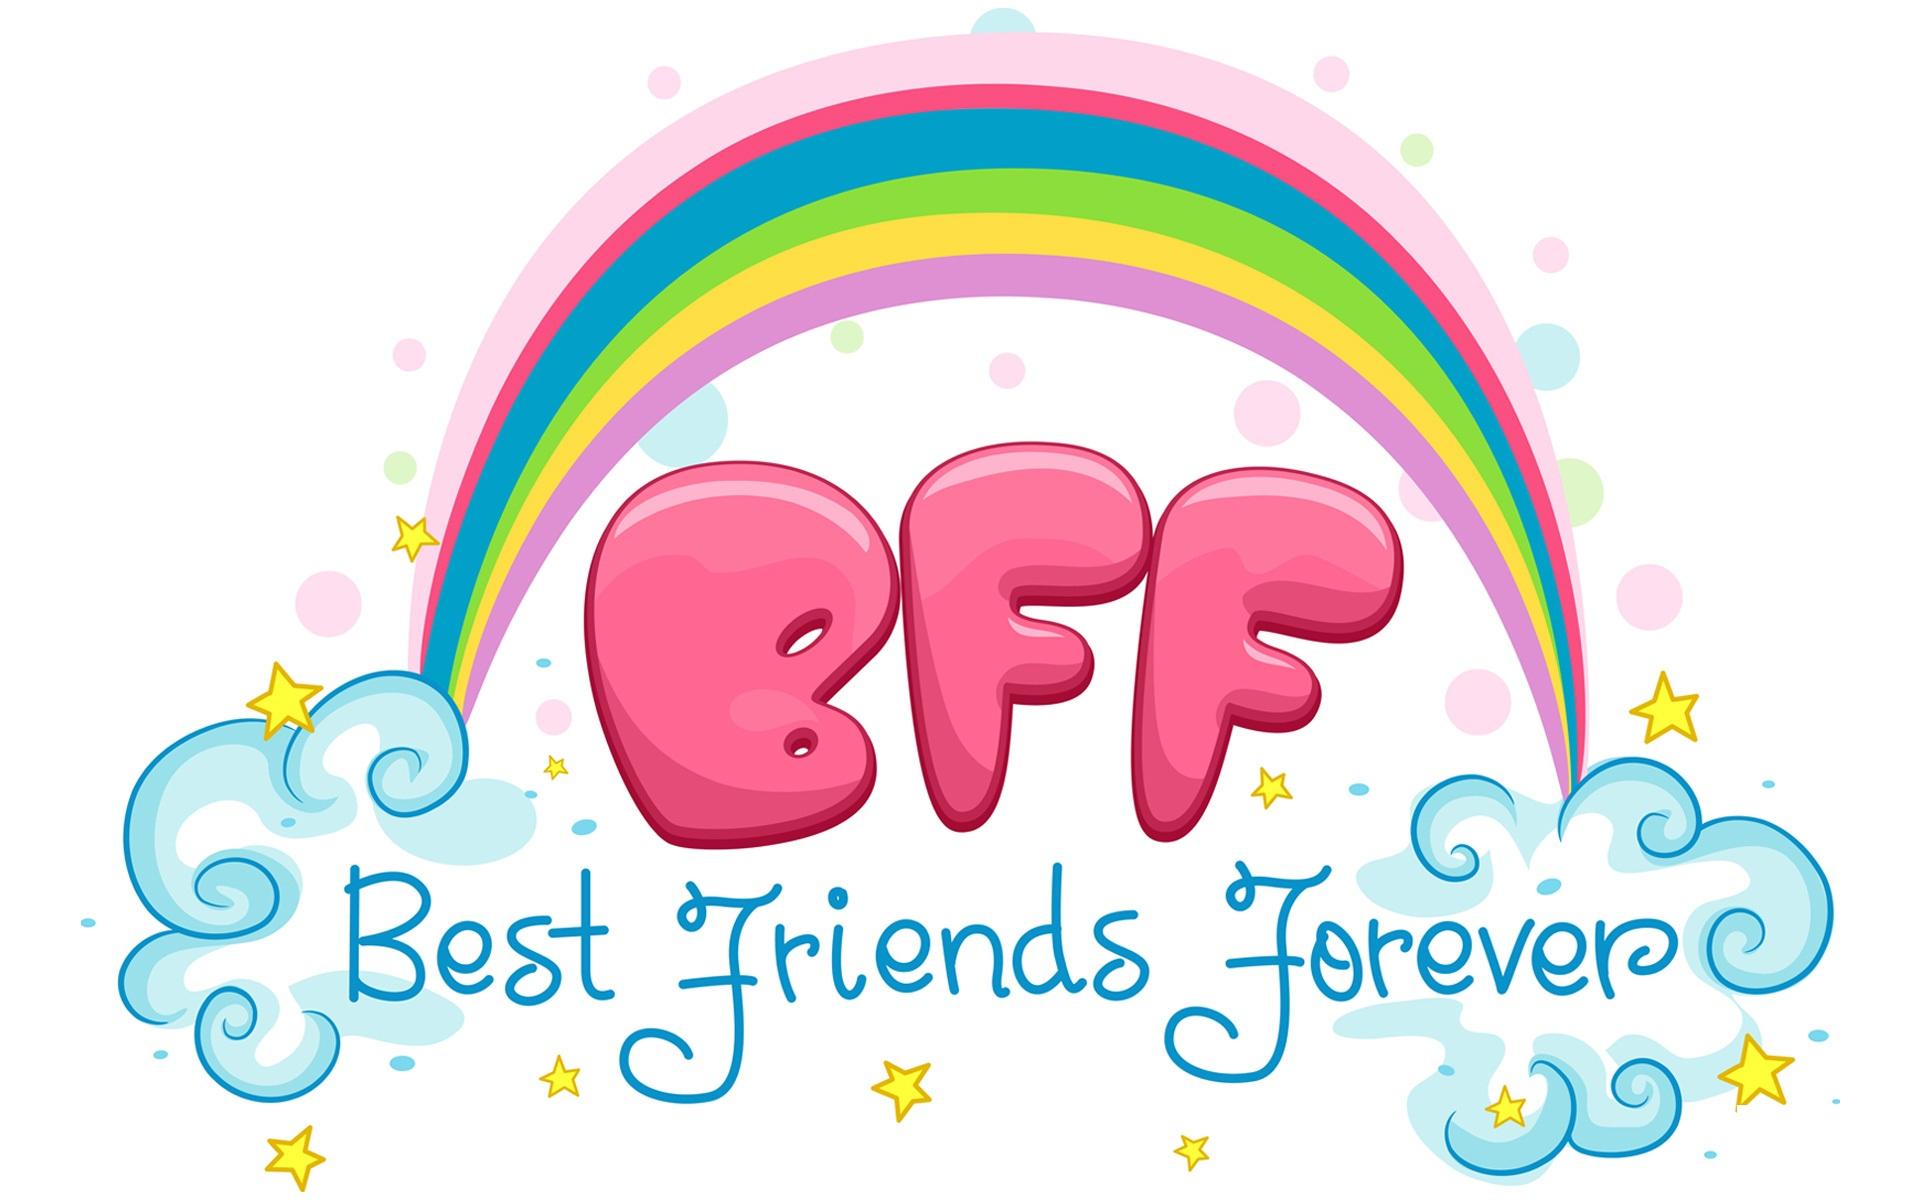 44+] Cute BFF Wallpapers